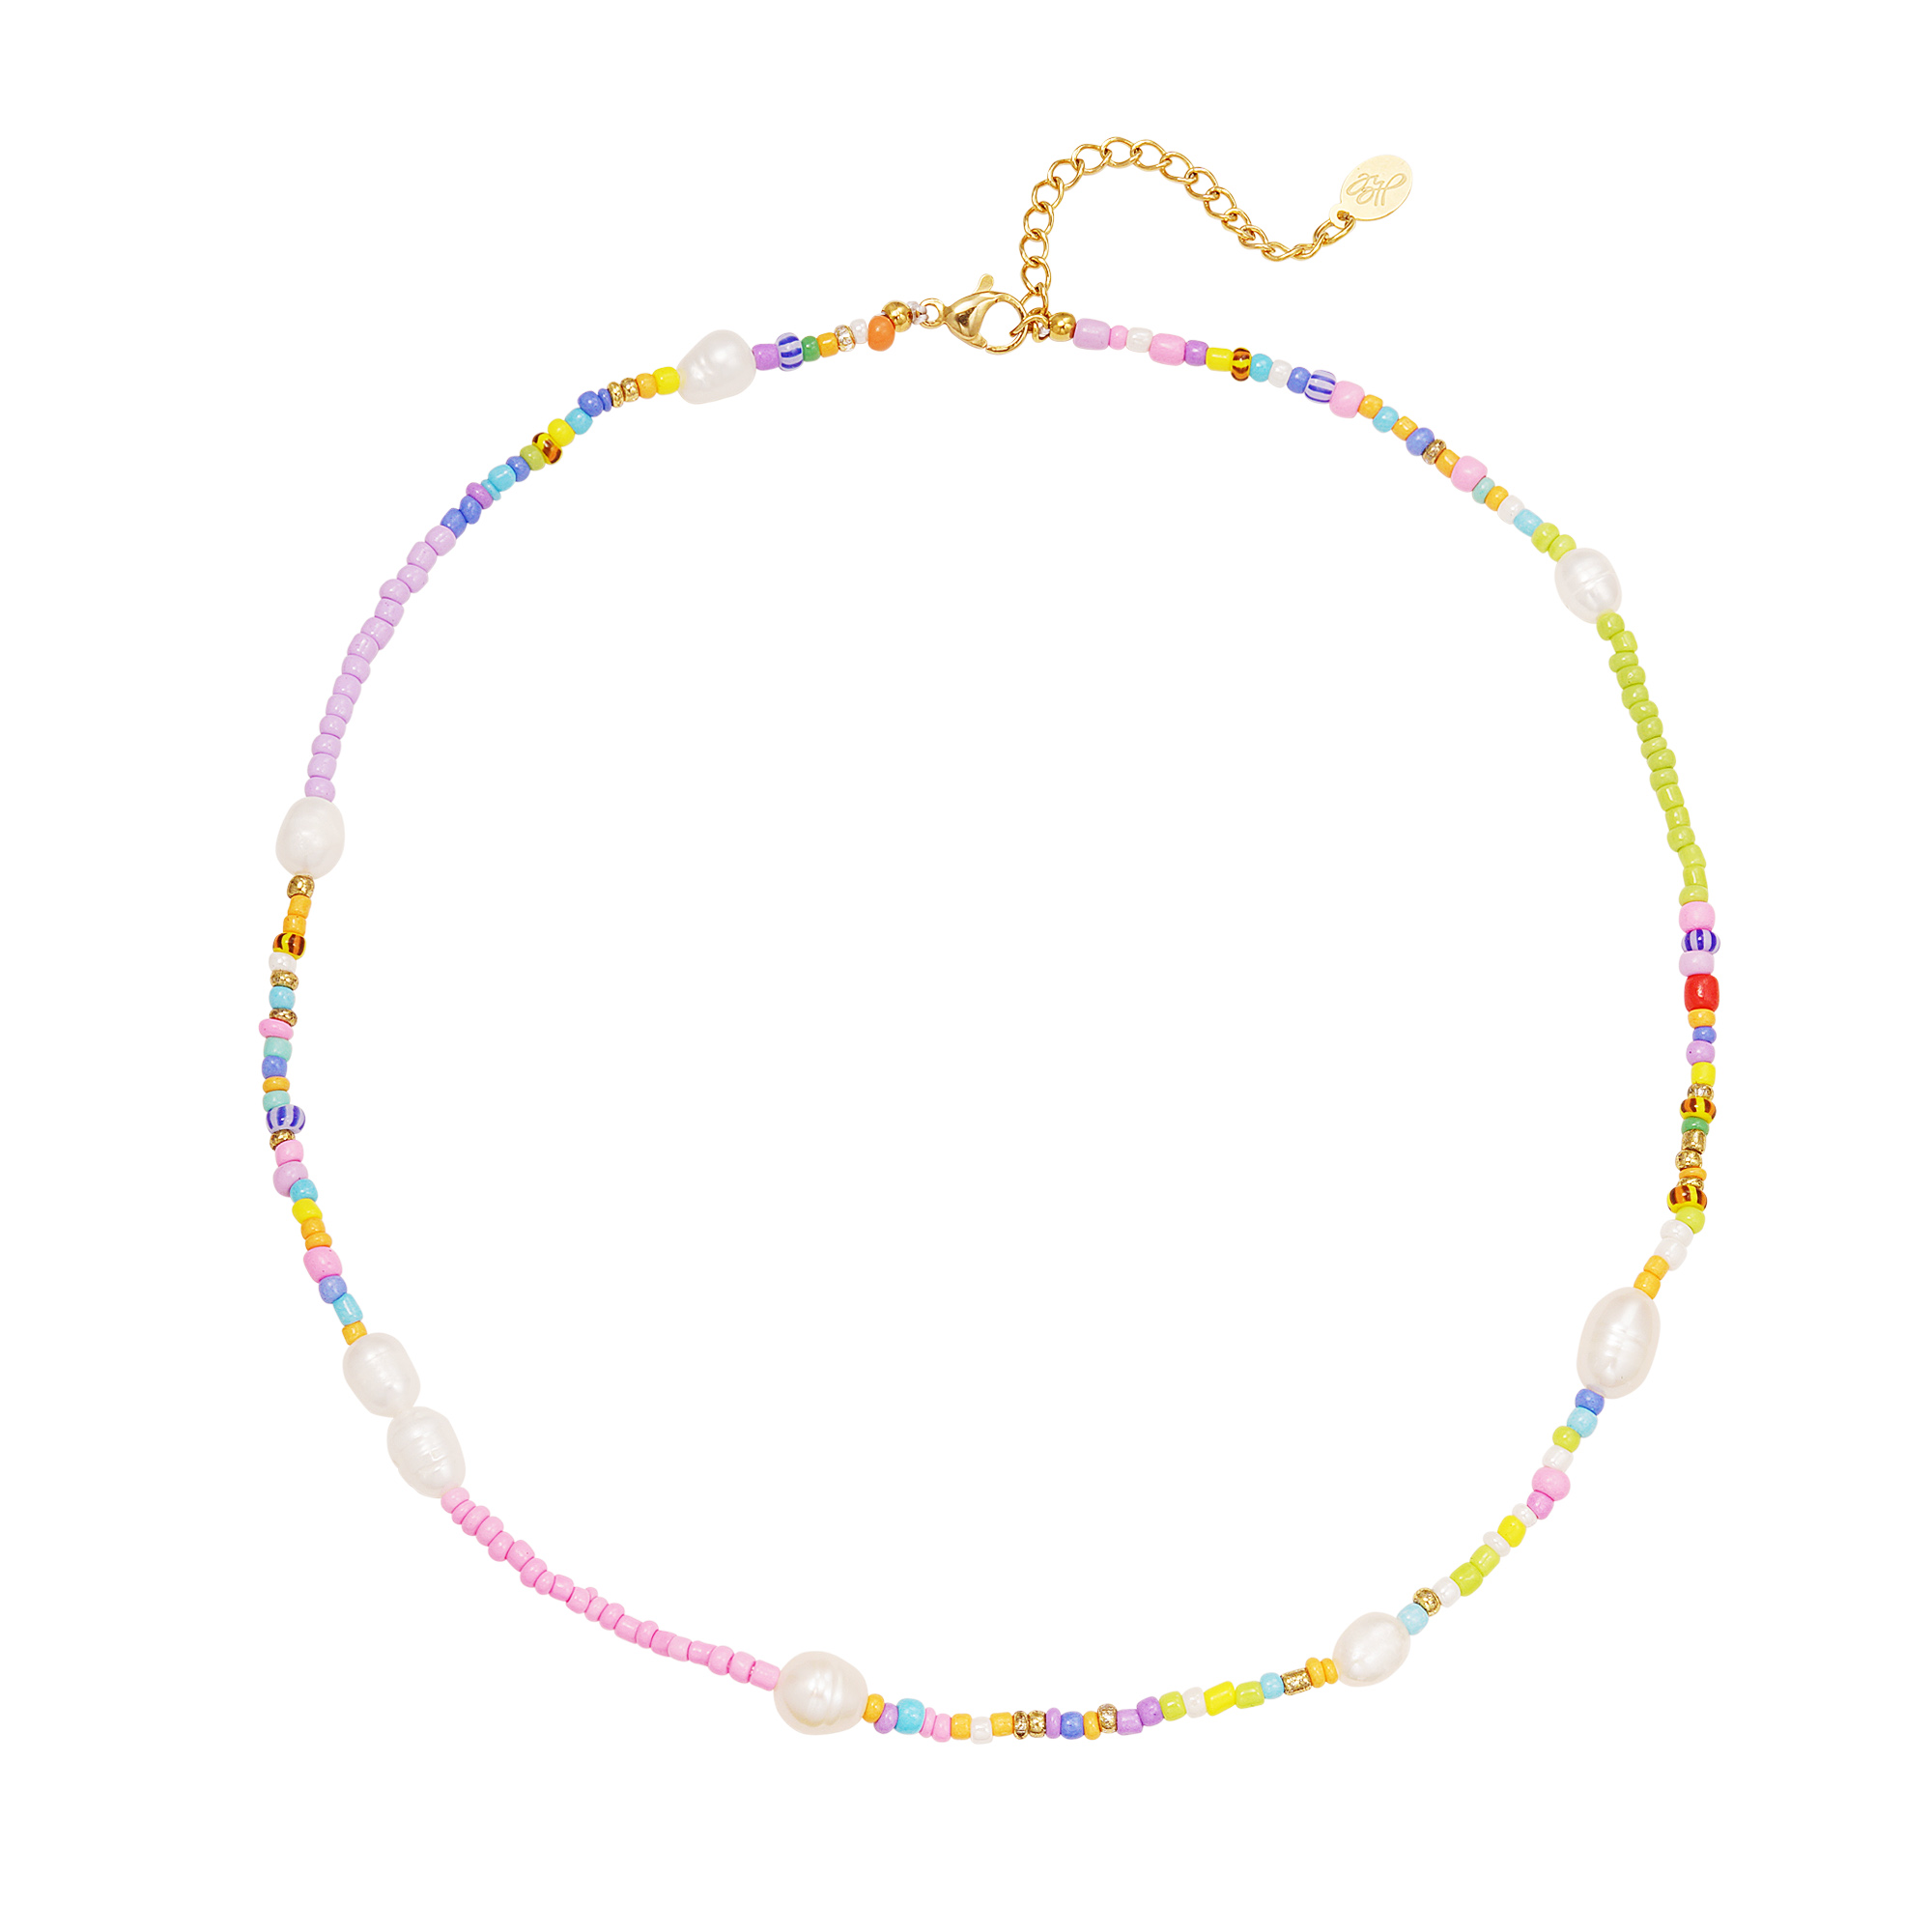 Necklace with colorful glass beads and pearls